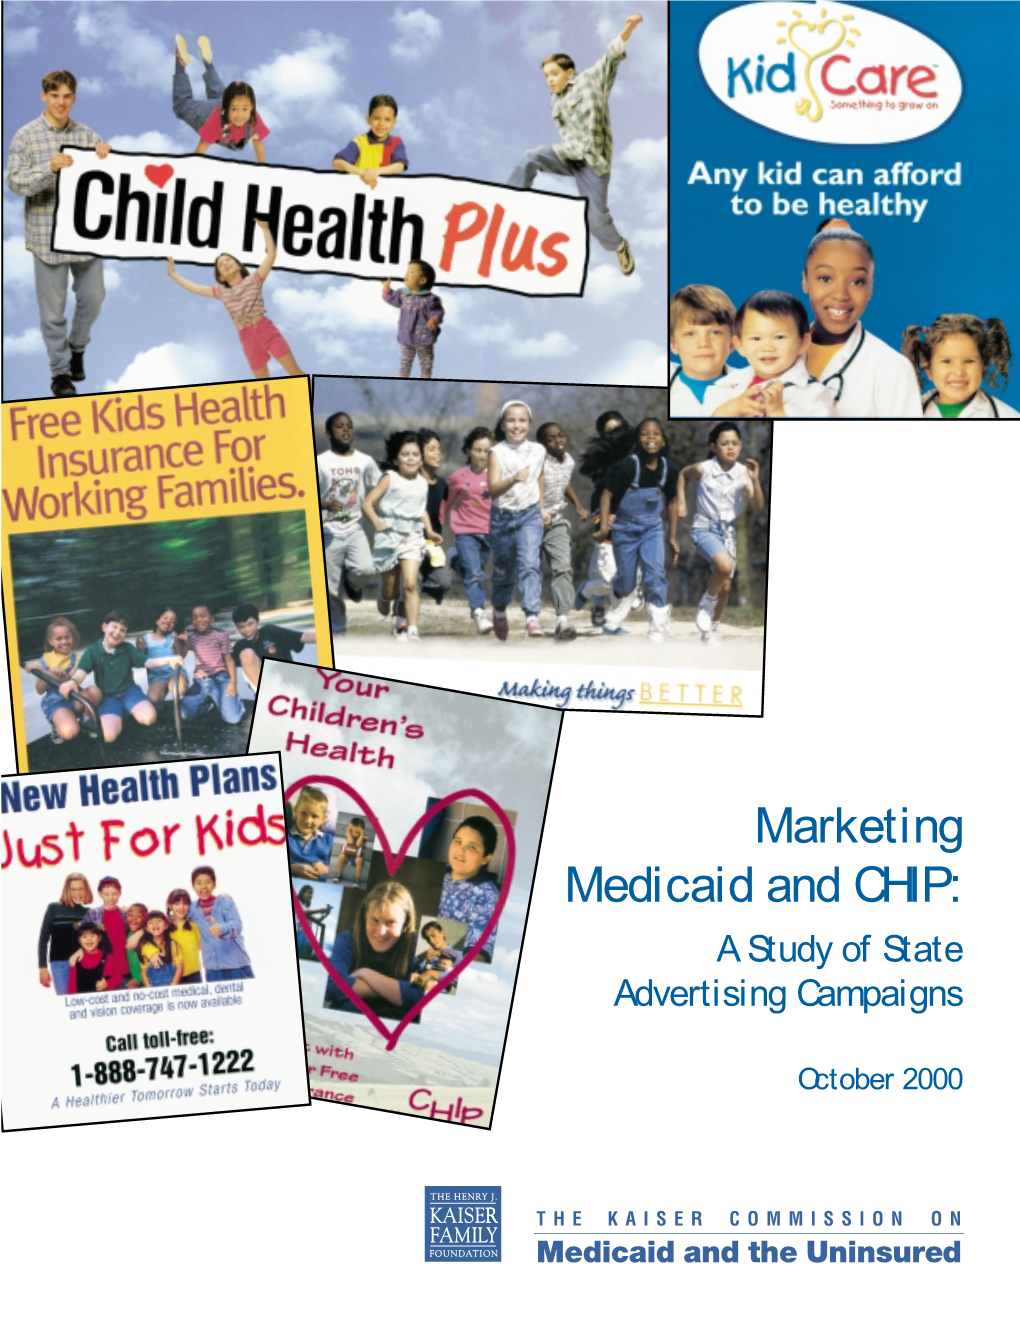 Marketing Medicaid and CHIP: a Study of Advertising Campaigns